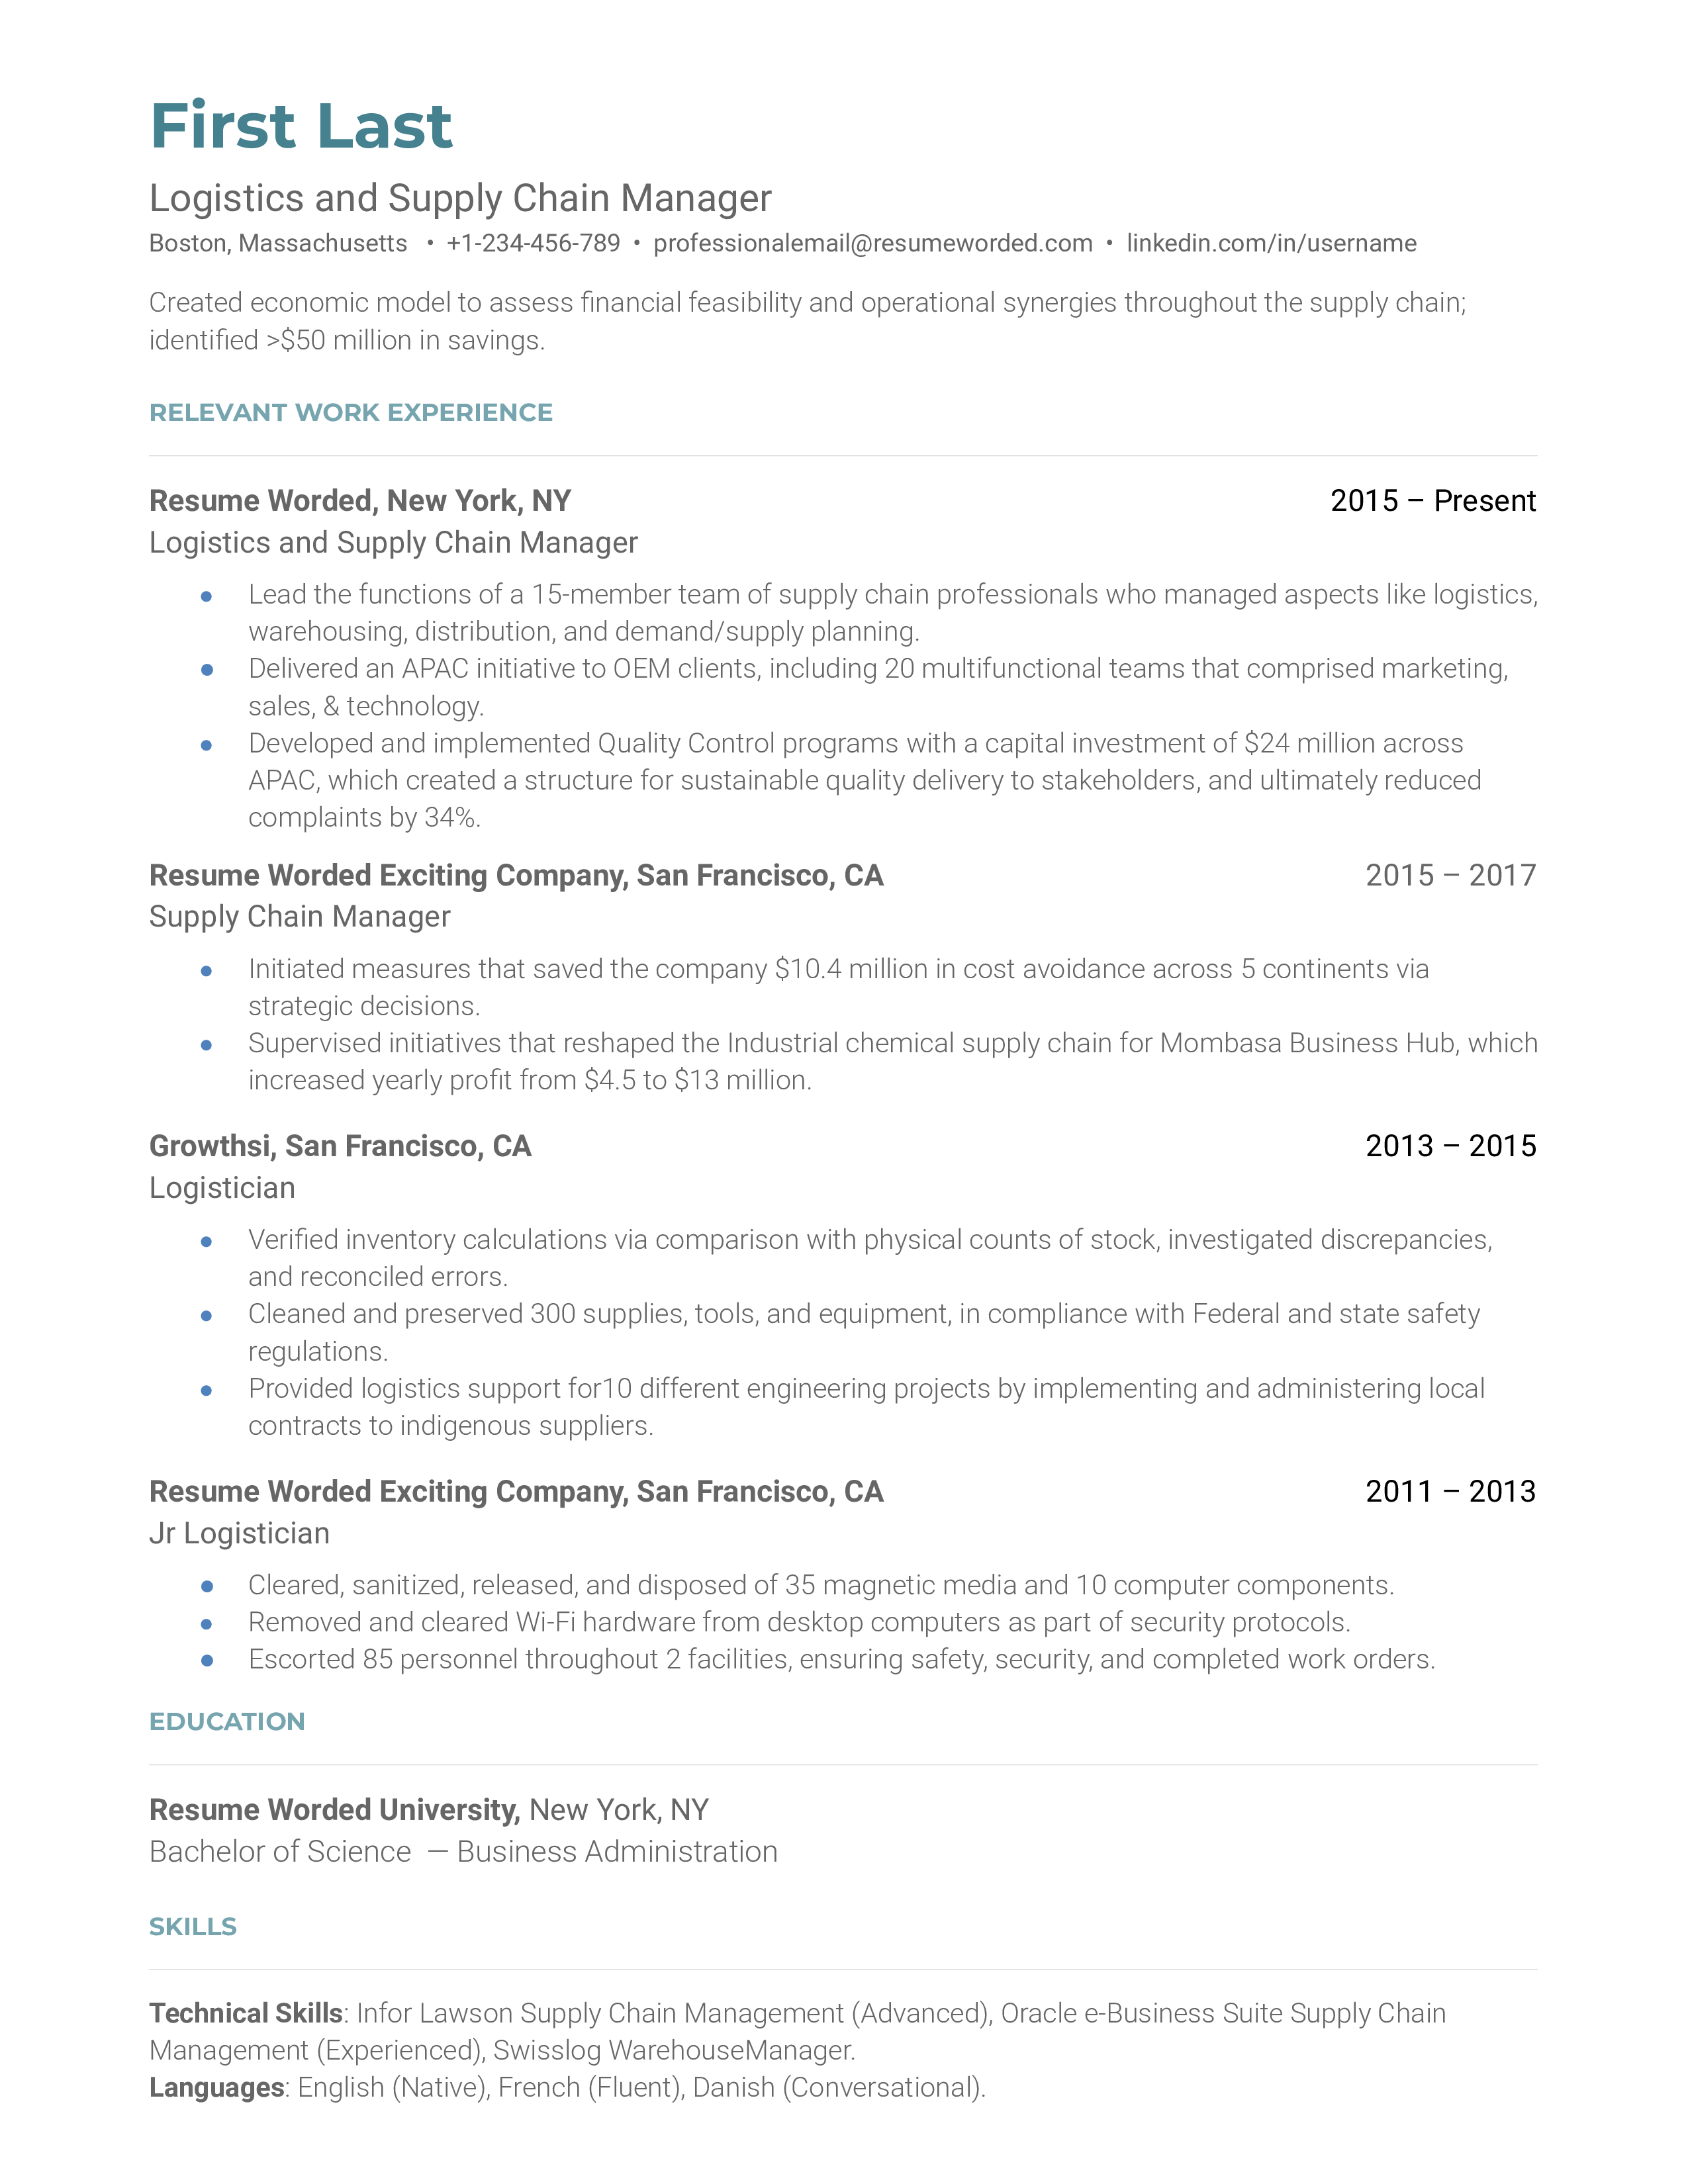 Logistics and Supply Chain Manager Resume Sample